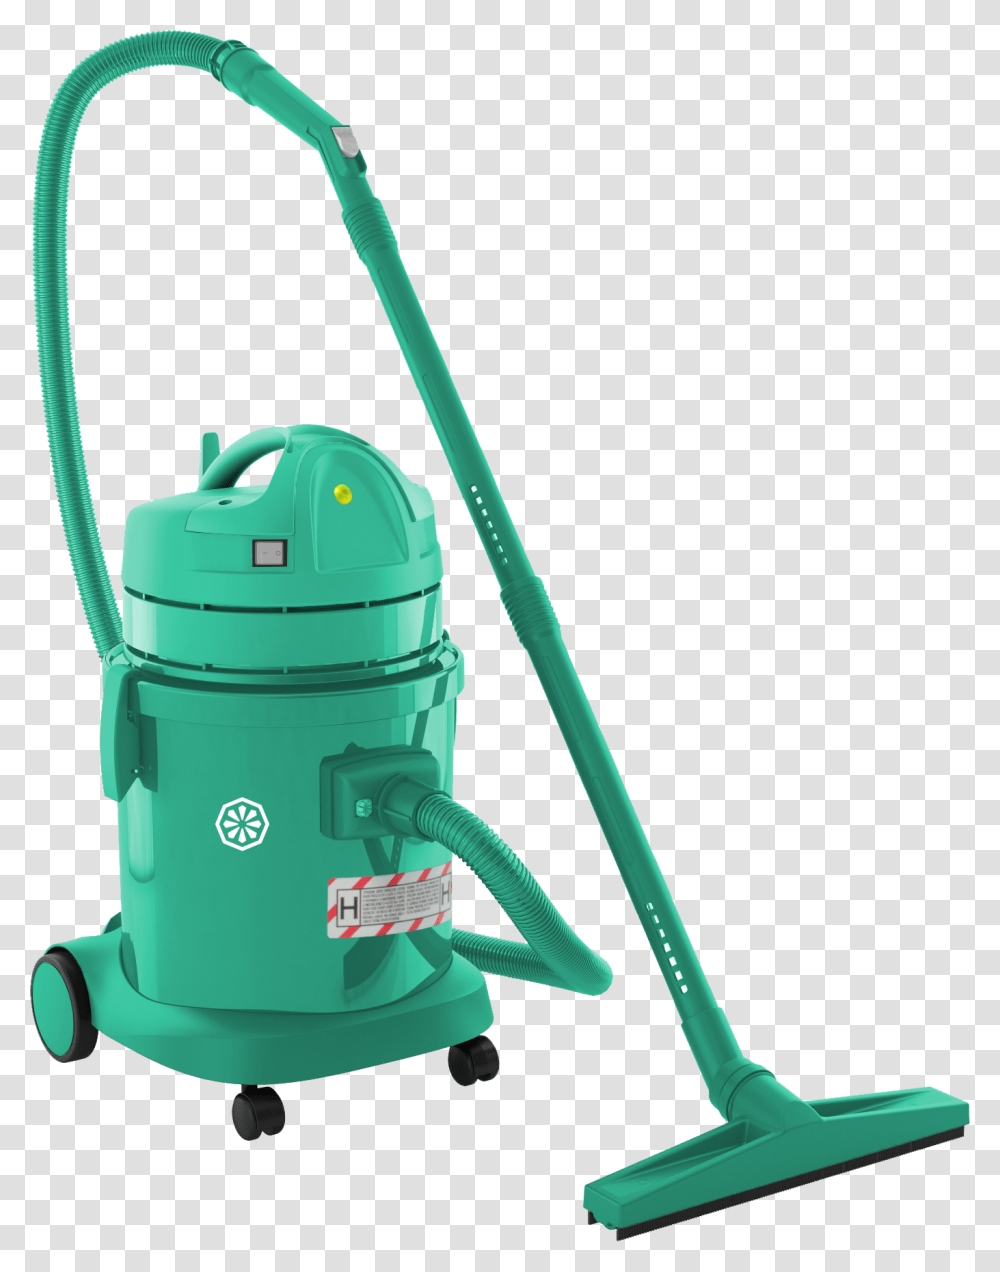 House Cleaning, Lawn Mower, Tool, Appliance, Vacuum Cleaner Transparent Png